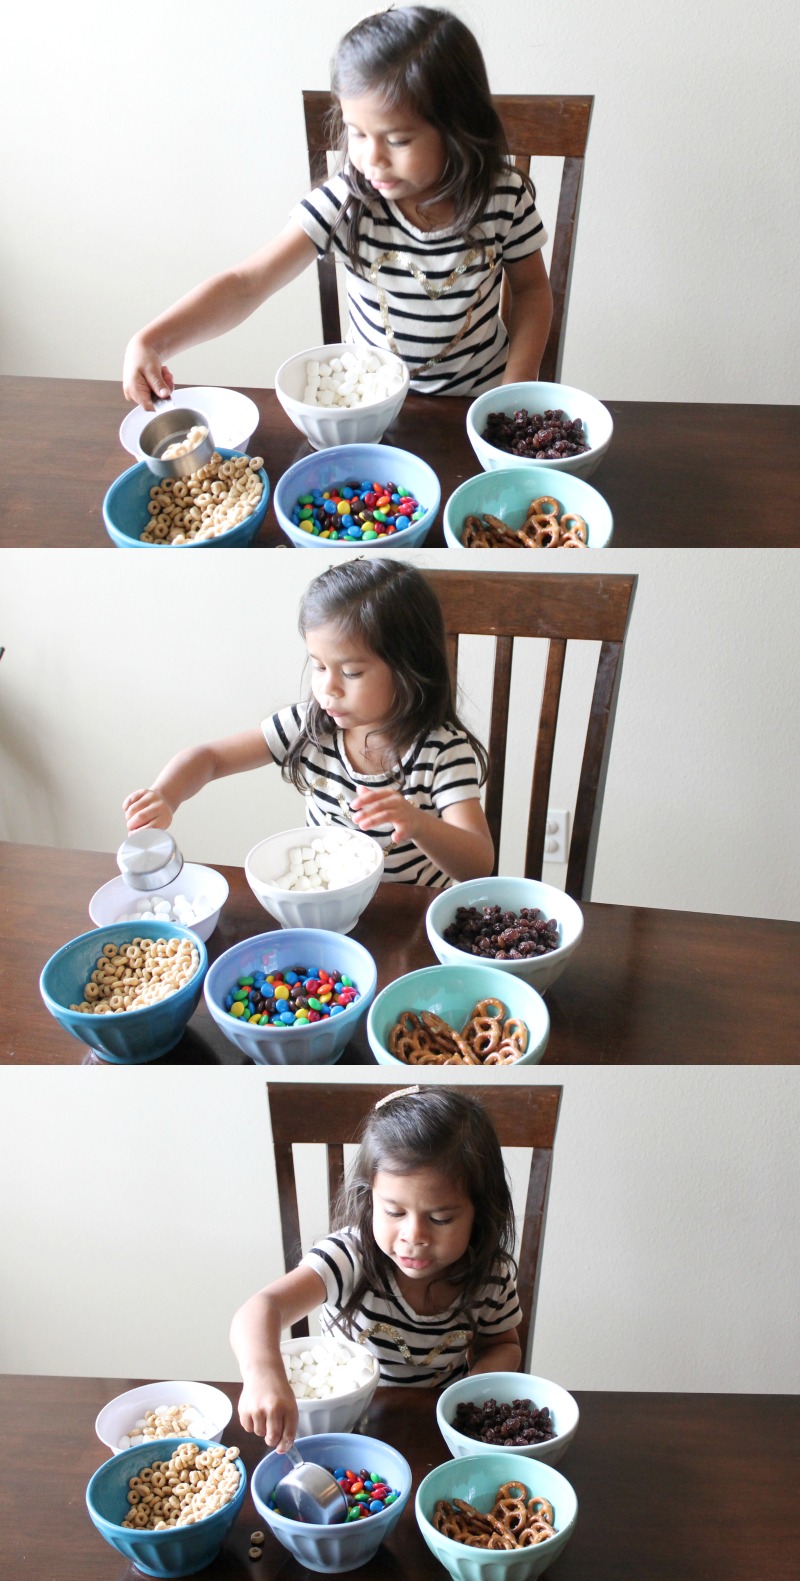 A kid-approved trail mix. Make as a rainy day activity or anytime. This trail mix is definitely a favorite!